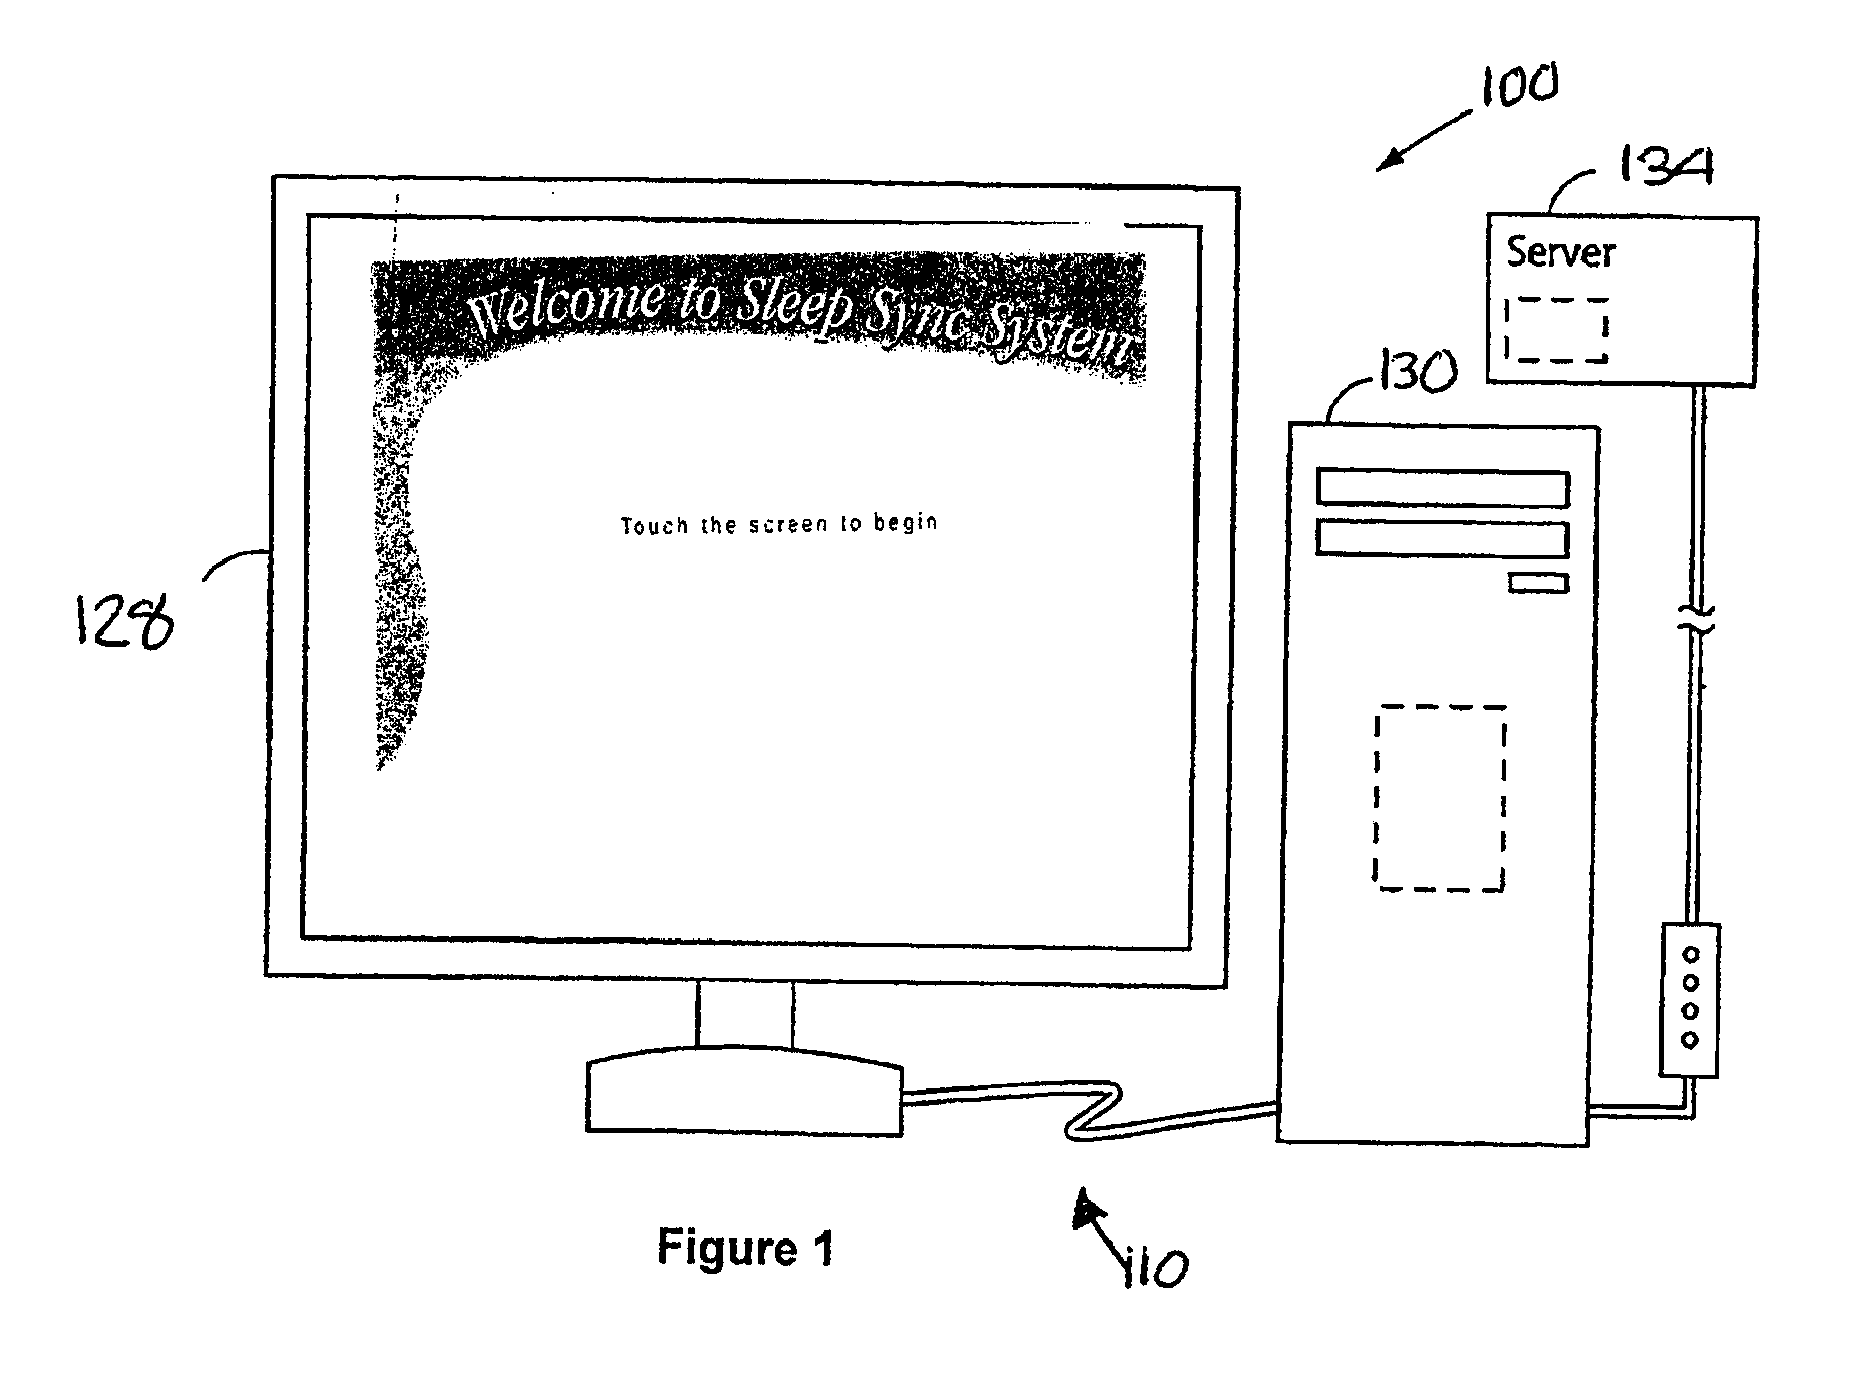 System and Method for Selecting a Pillow and Mattress